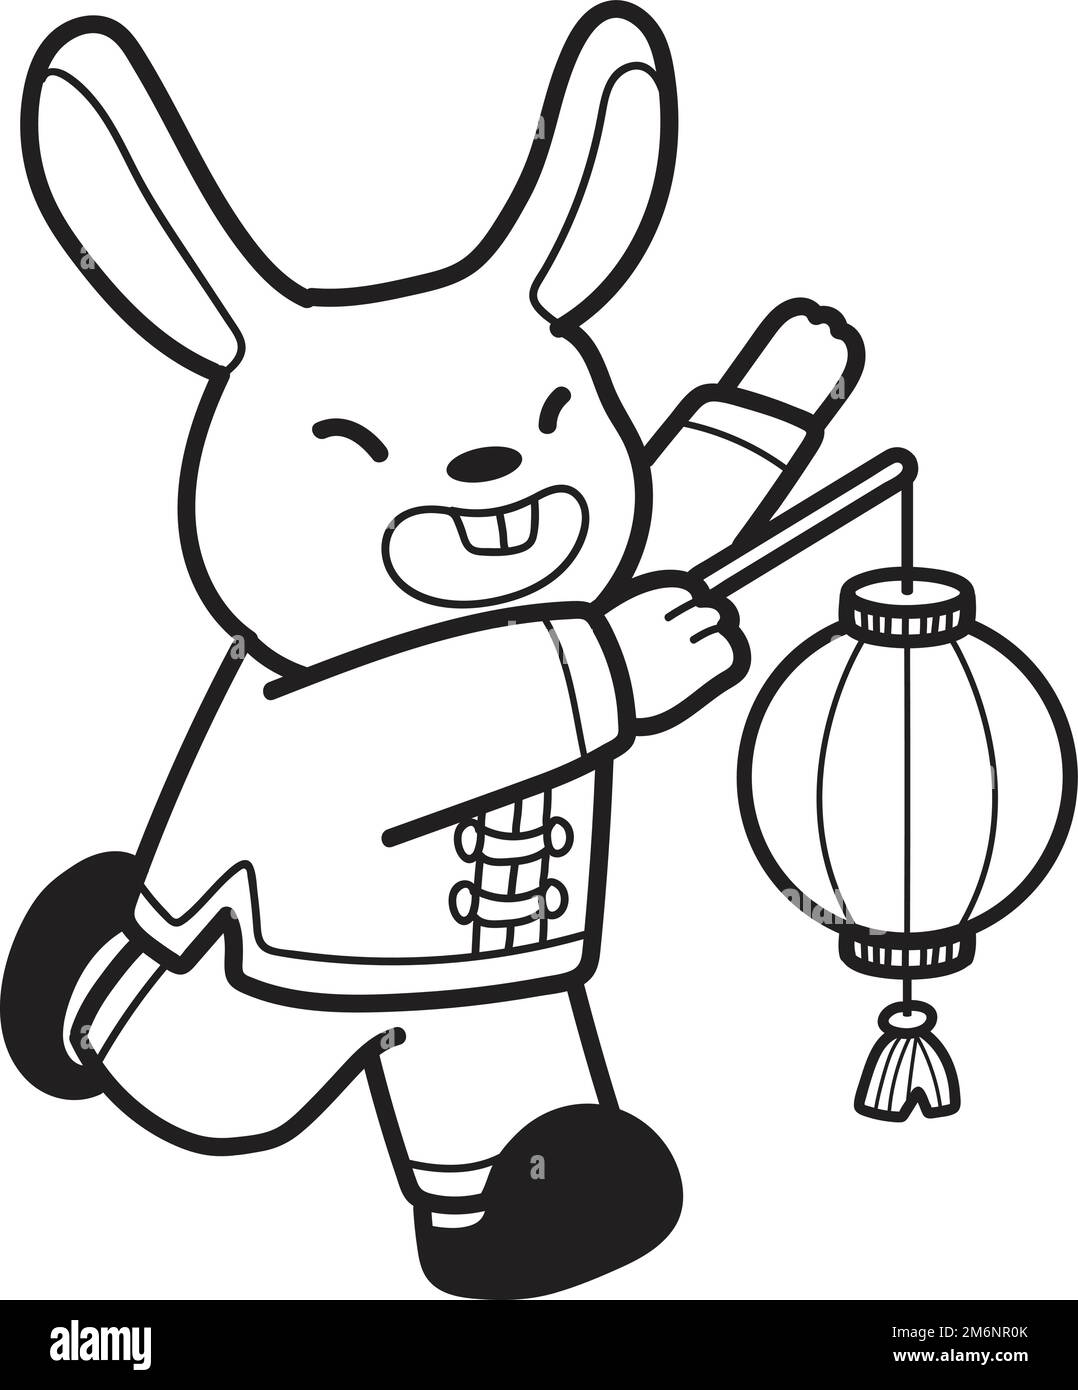 Hand Drawn chinese rabbit with lantern illustration isolated on background Stock Vector